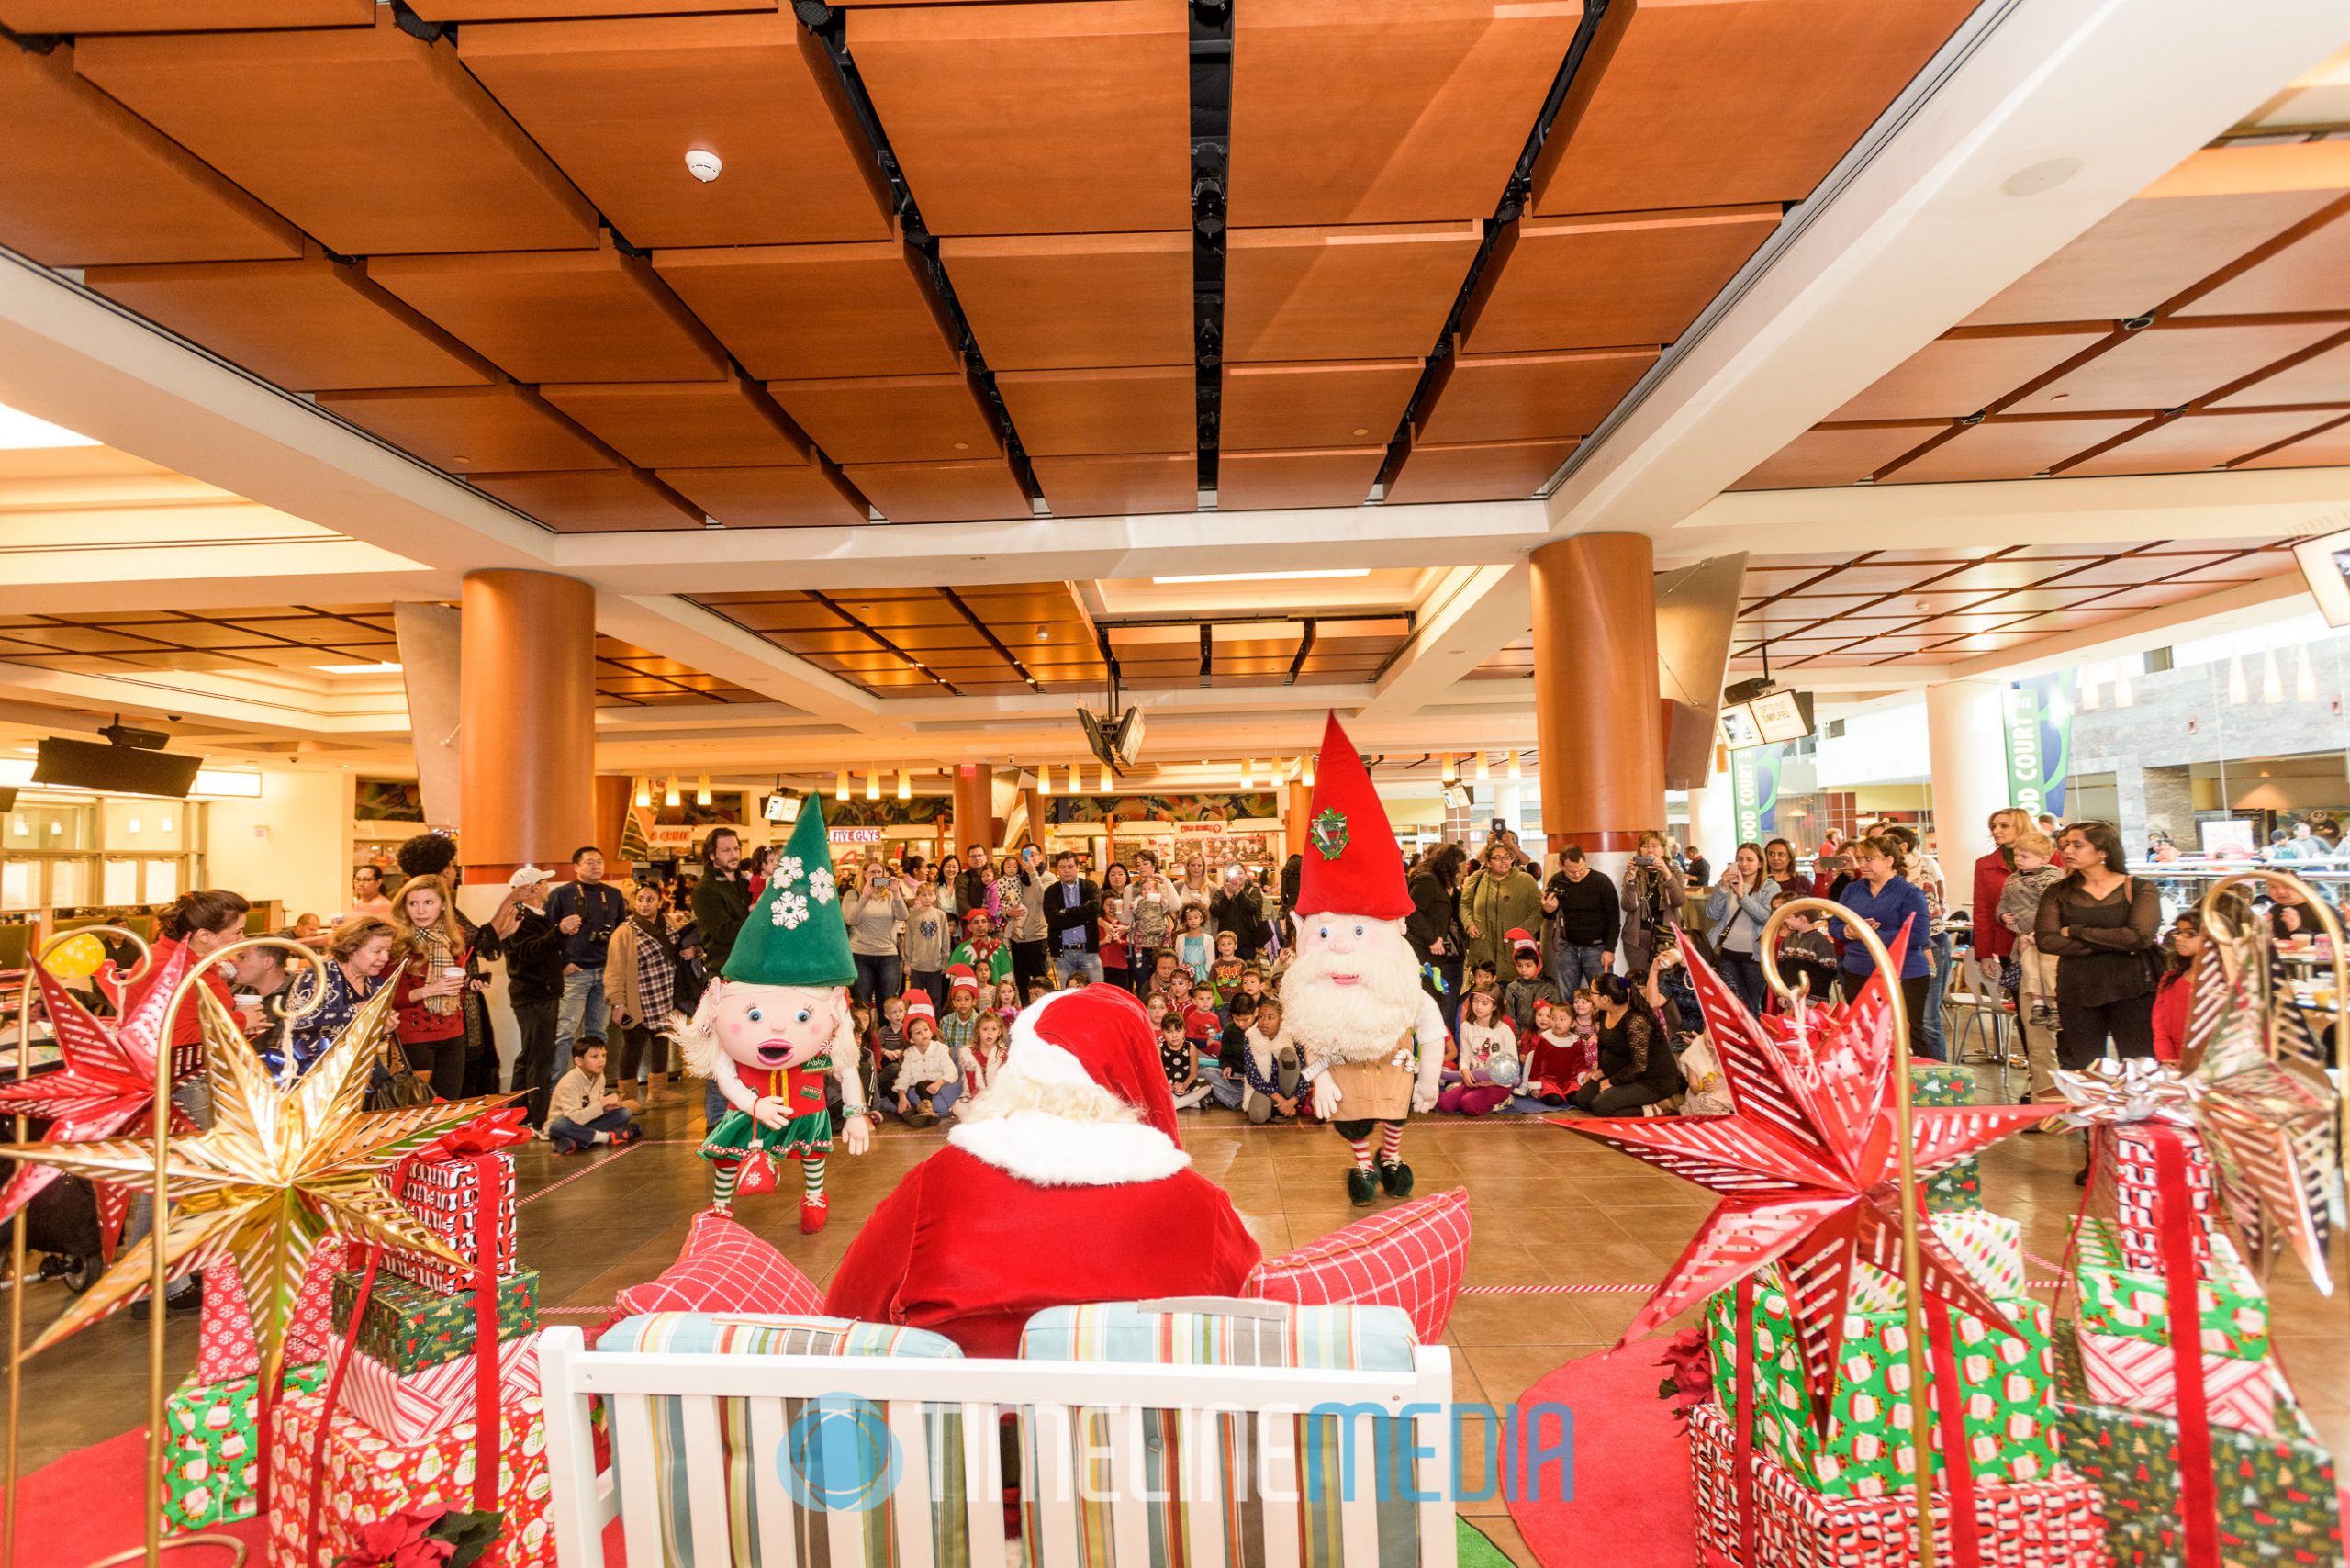 Those Funny Little People perform at the Santa Breakfast - Tysons Corner Center